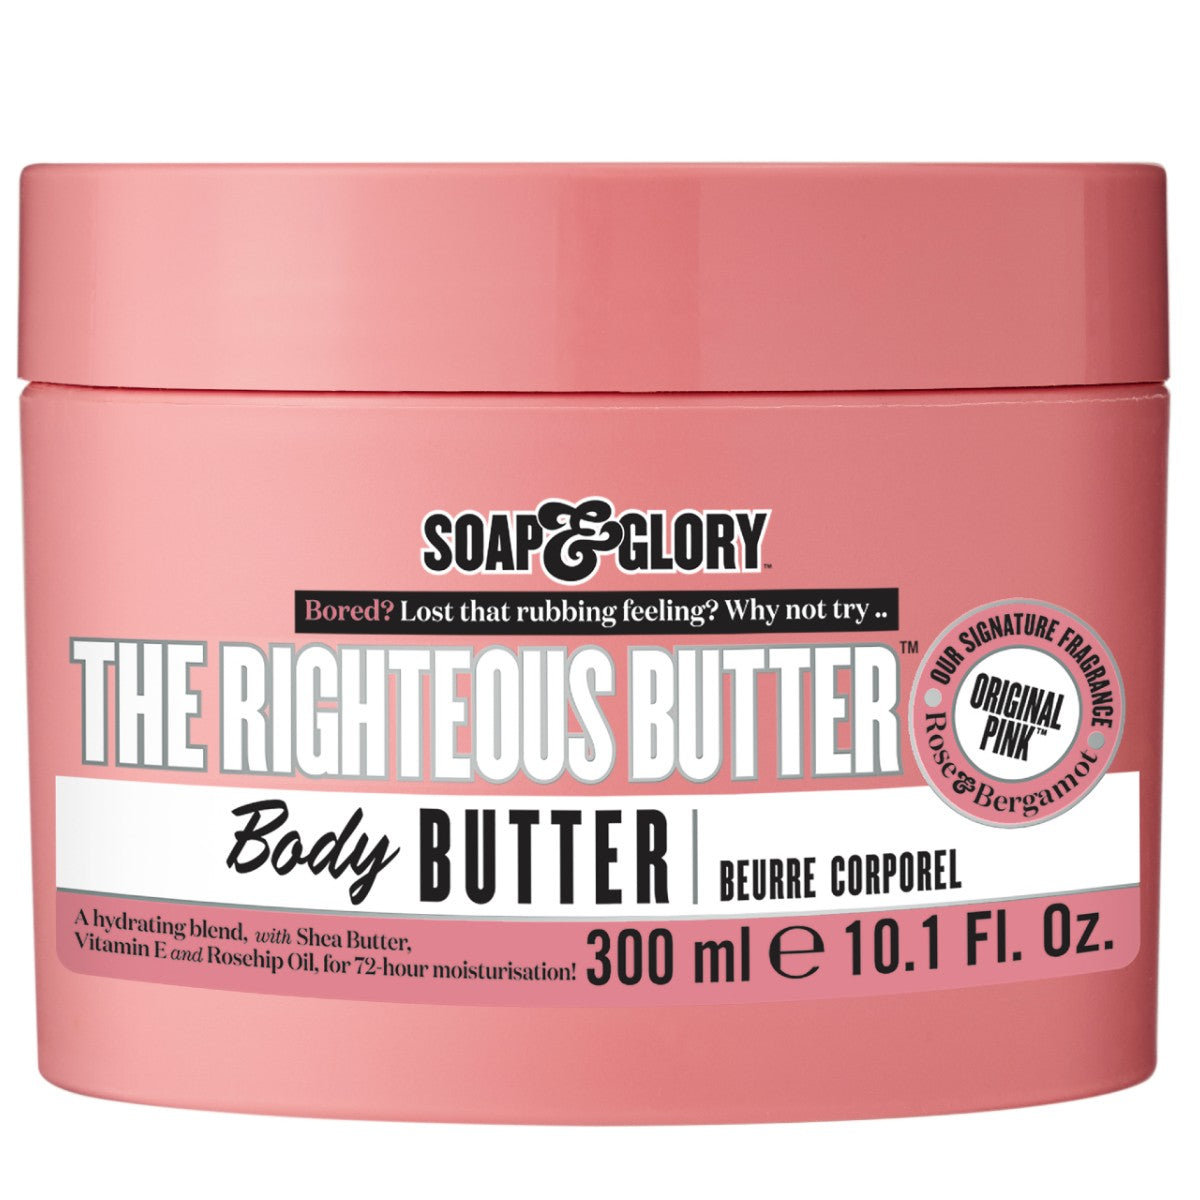 THE RIGHTEOUS BUTTER™ BODY LOTION - 300 ml